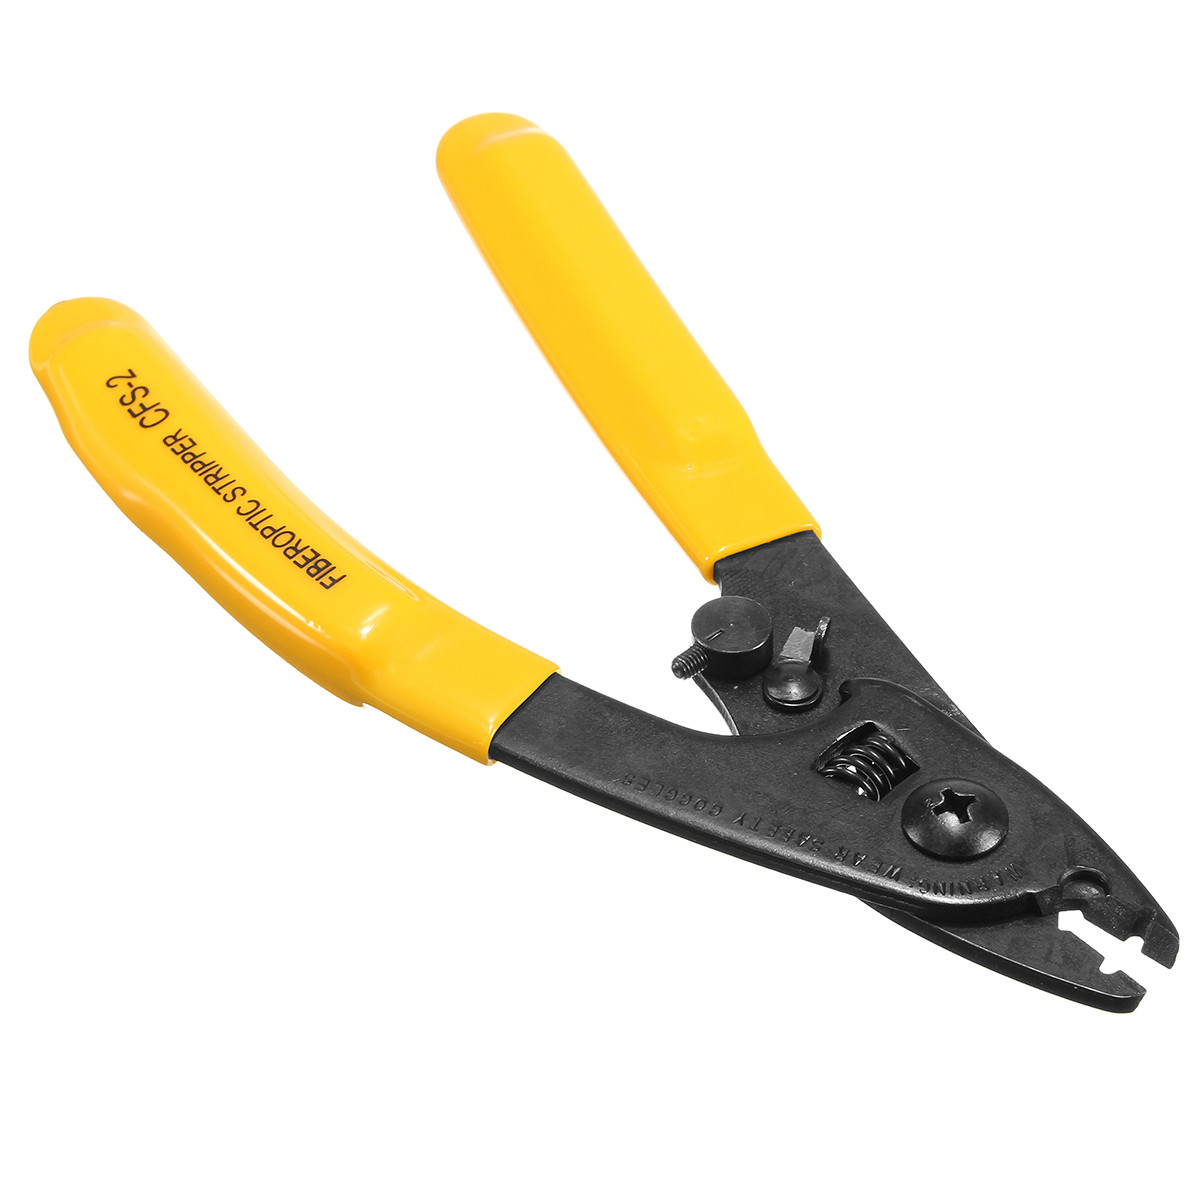 CF-S2-Steel-Wire-Strippers-FTTH-Tools-Miller-Optical-Fiber-Stripping-Pliers-Cutter-1069655